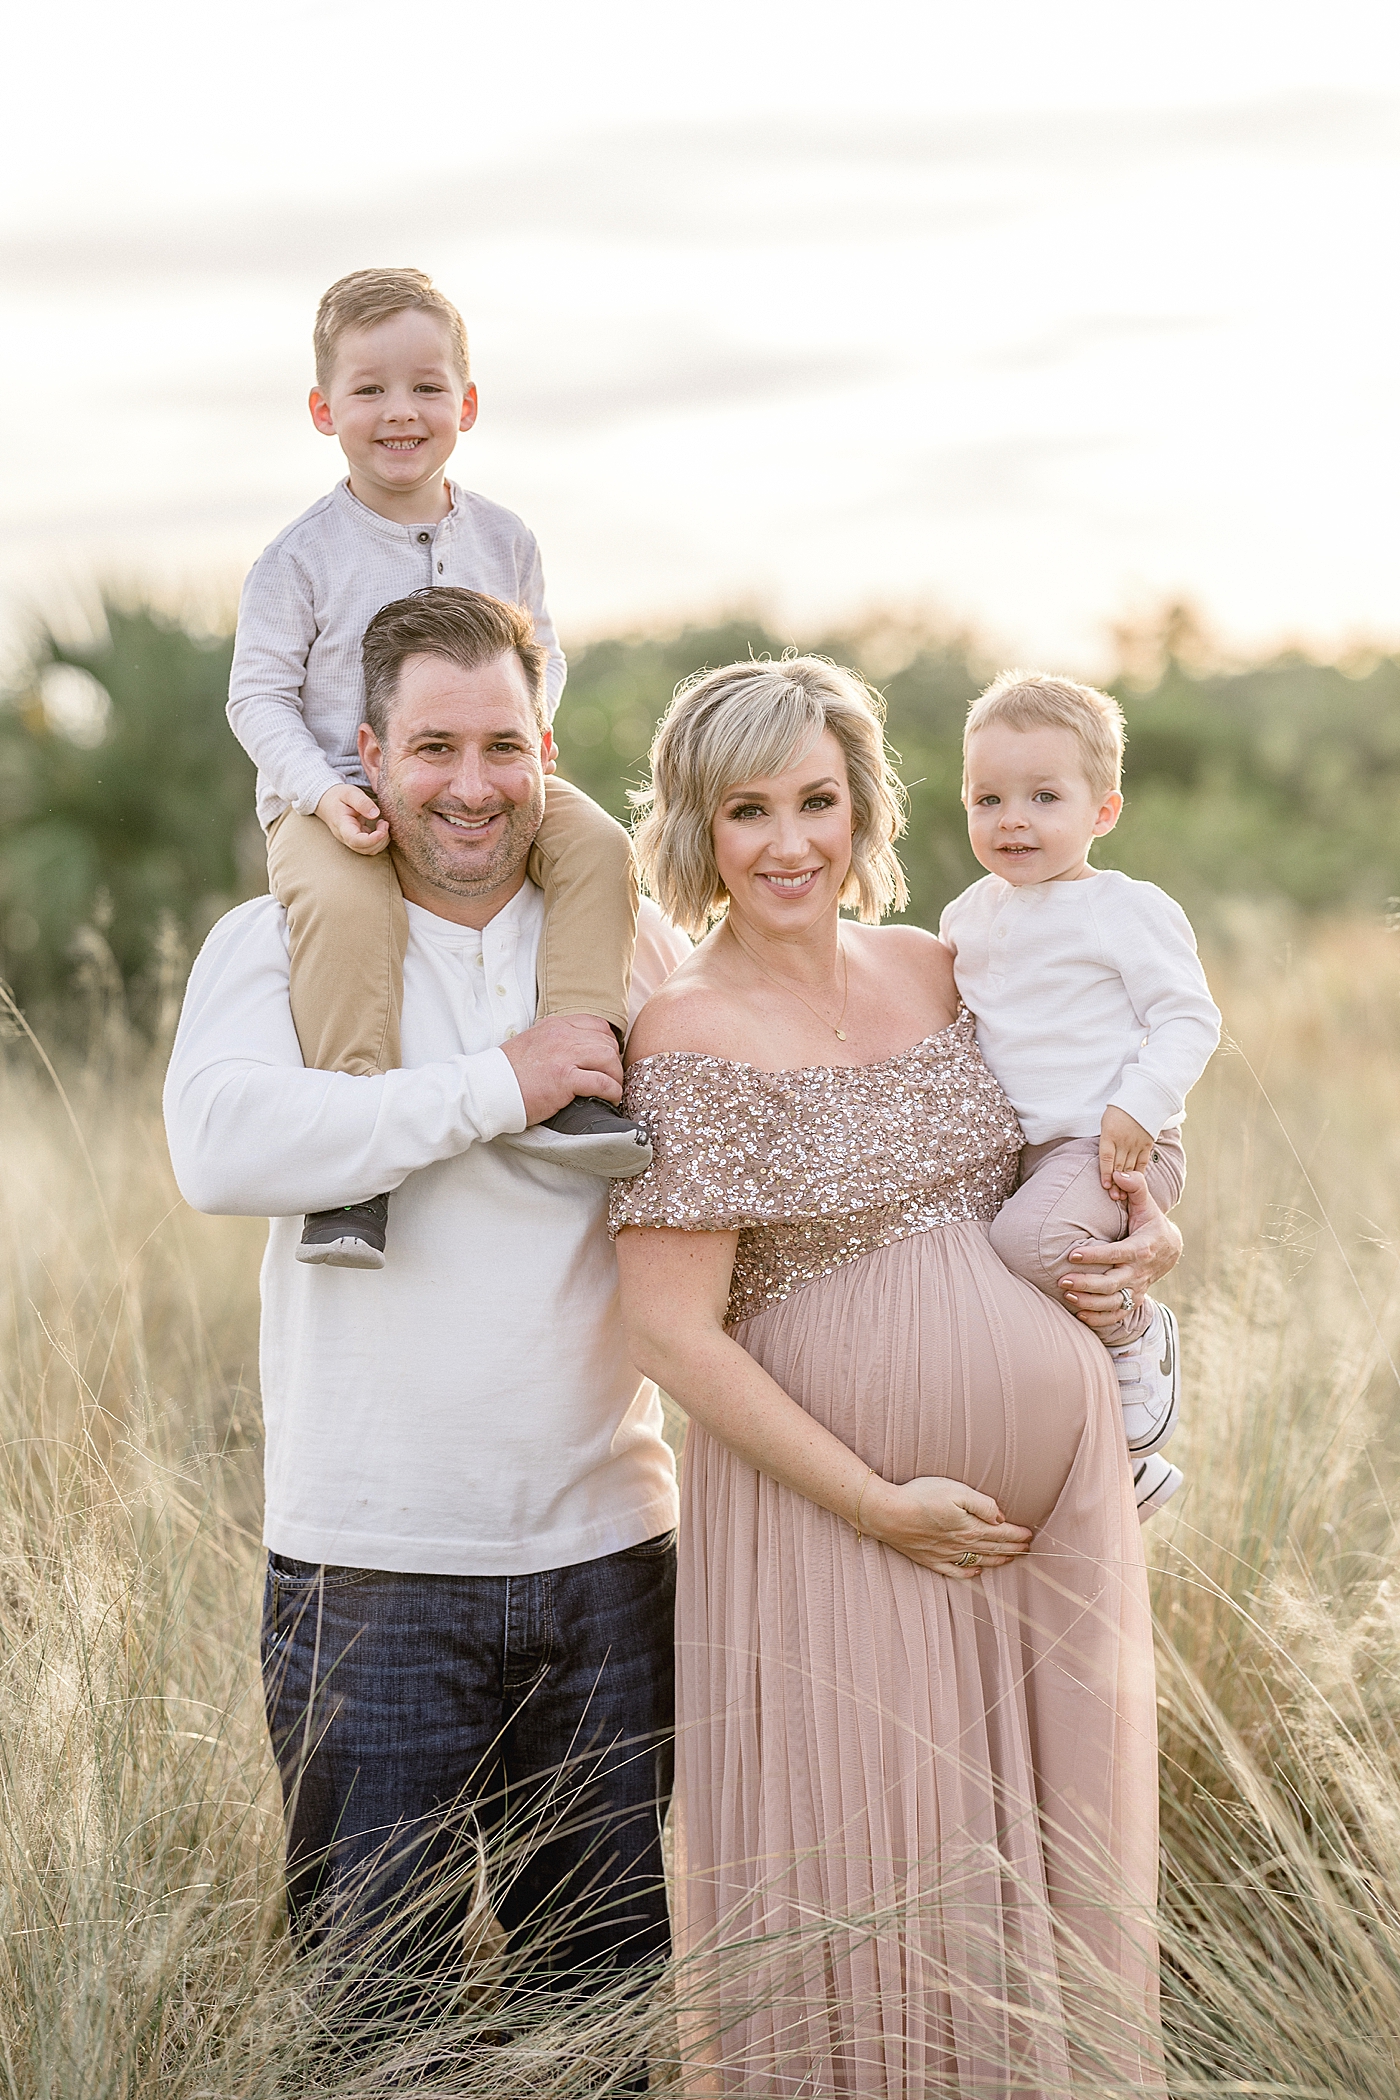 Family portrait with Mom holding one son and the other on Dad's shoulders. Photo by Brittany Elise Photography.